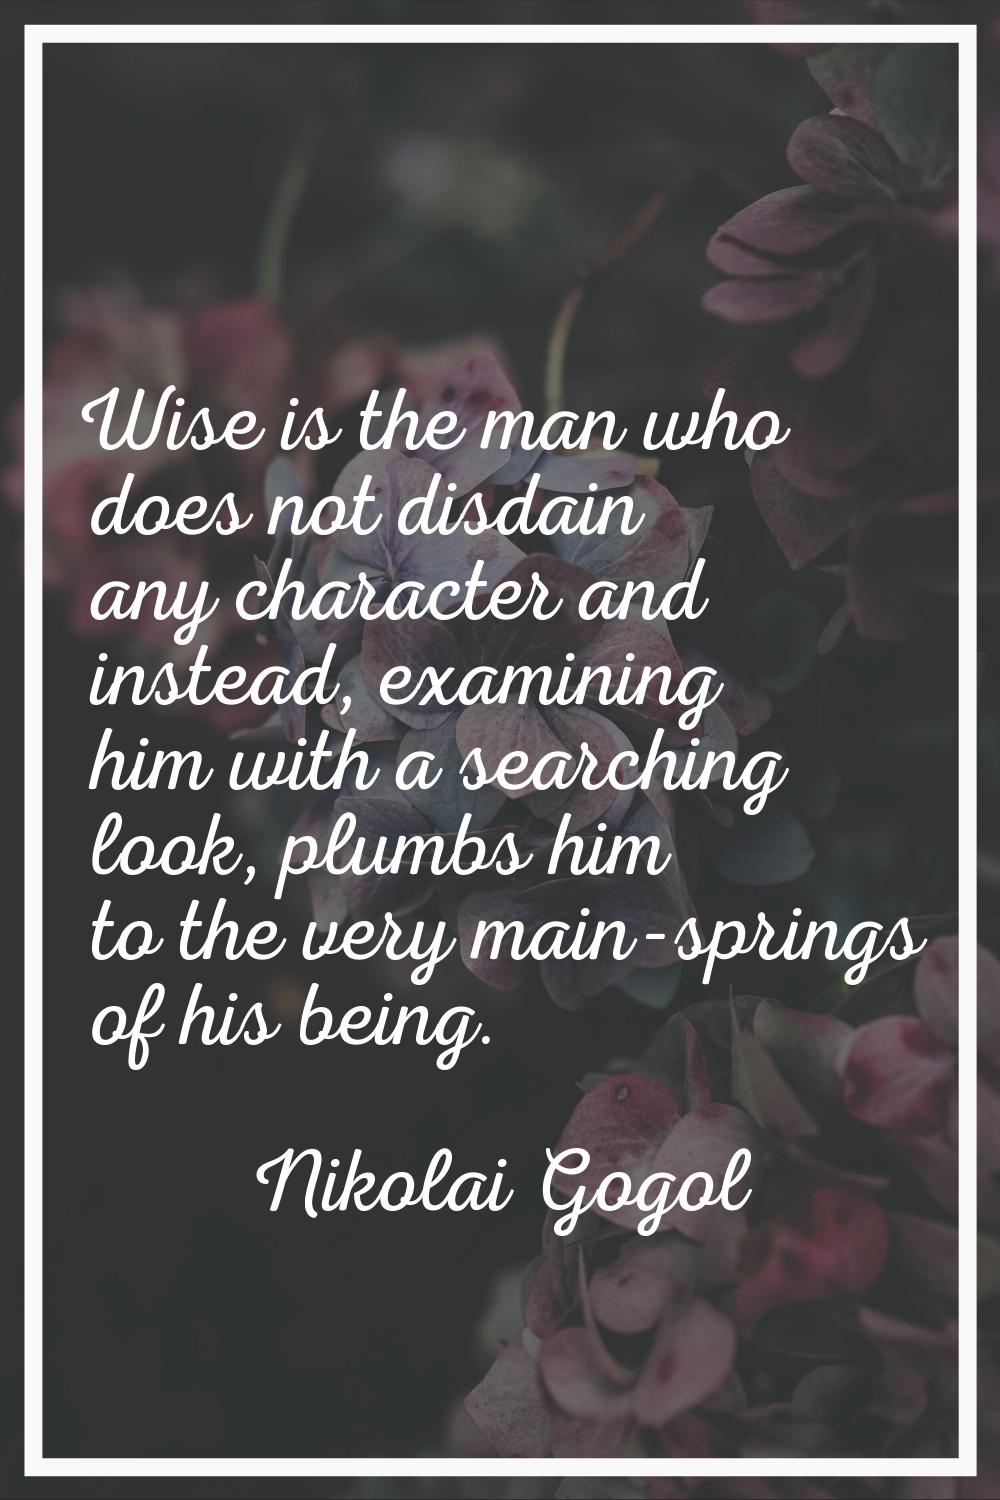 Wise is the man who does not disdain any character and instead, examining him with a searching look